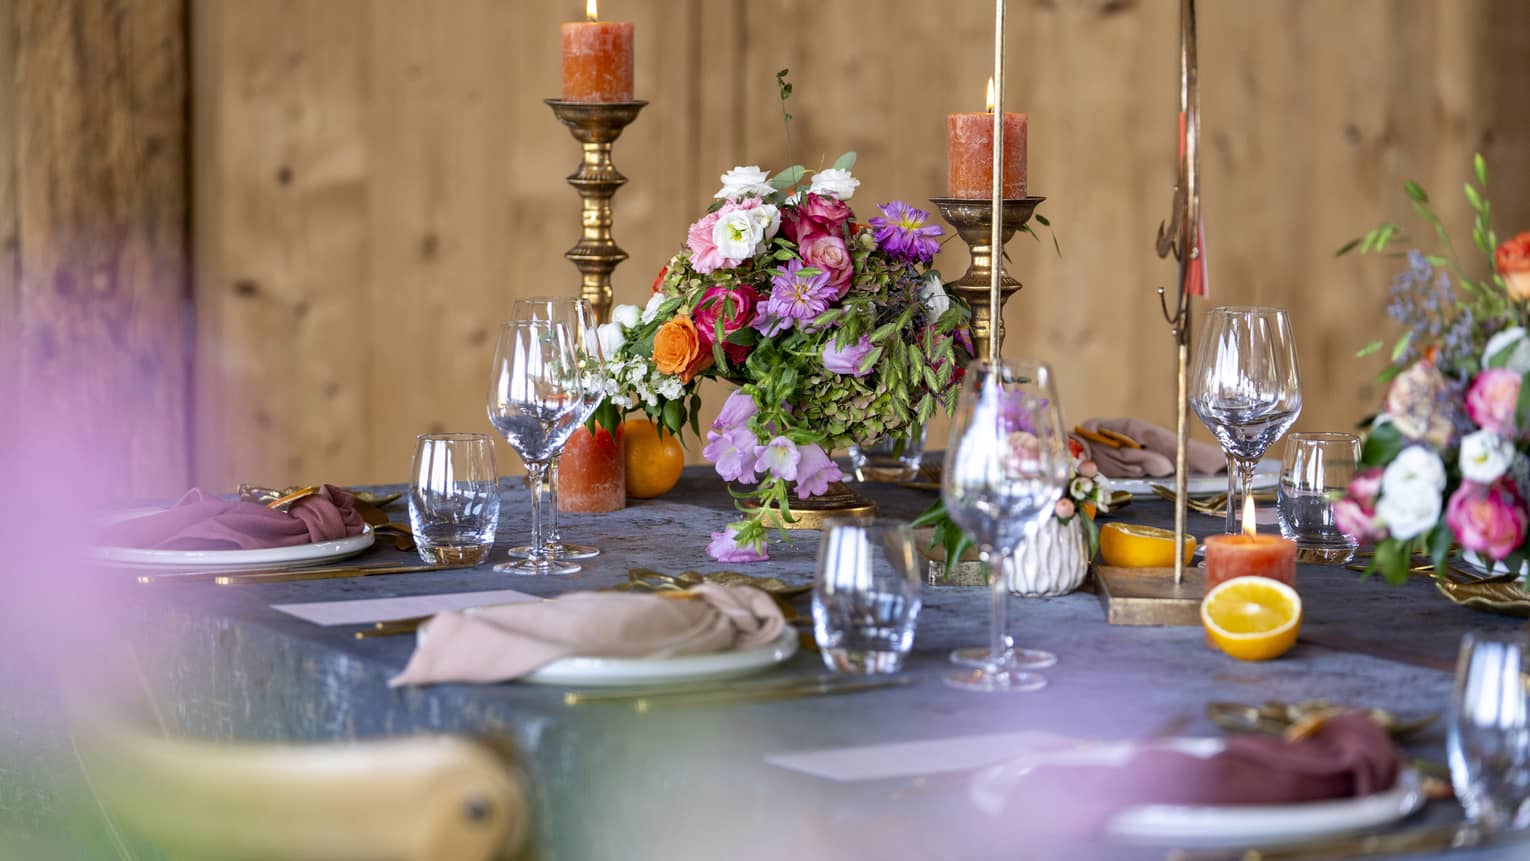 Wedding table setting with assorted flowers and burnished accents